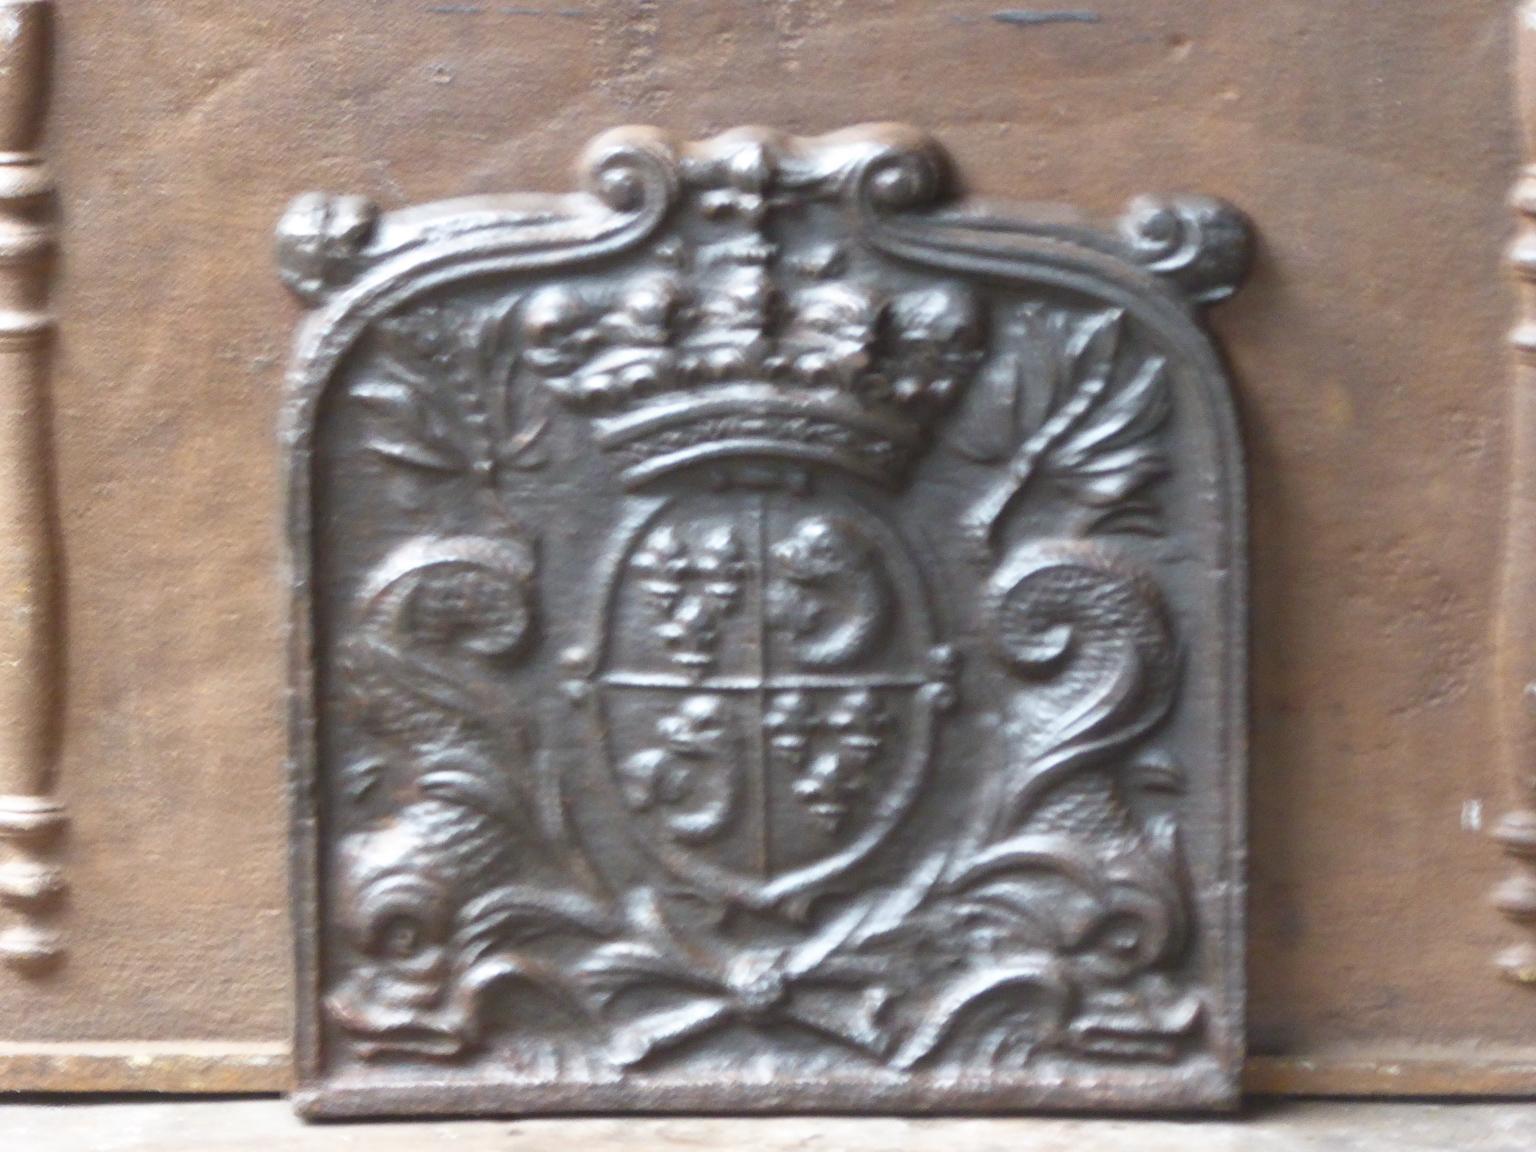 20th century French Louis XIV style fireback with the arms of France. This is the coat of arms of the House of Bourbon, an originally French royal house that became a major dynasty in Europe. It delivered kings for Spain (Navarra), France, both